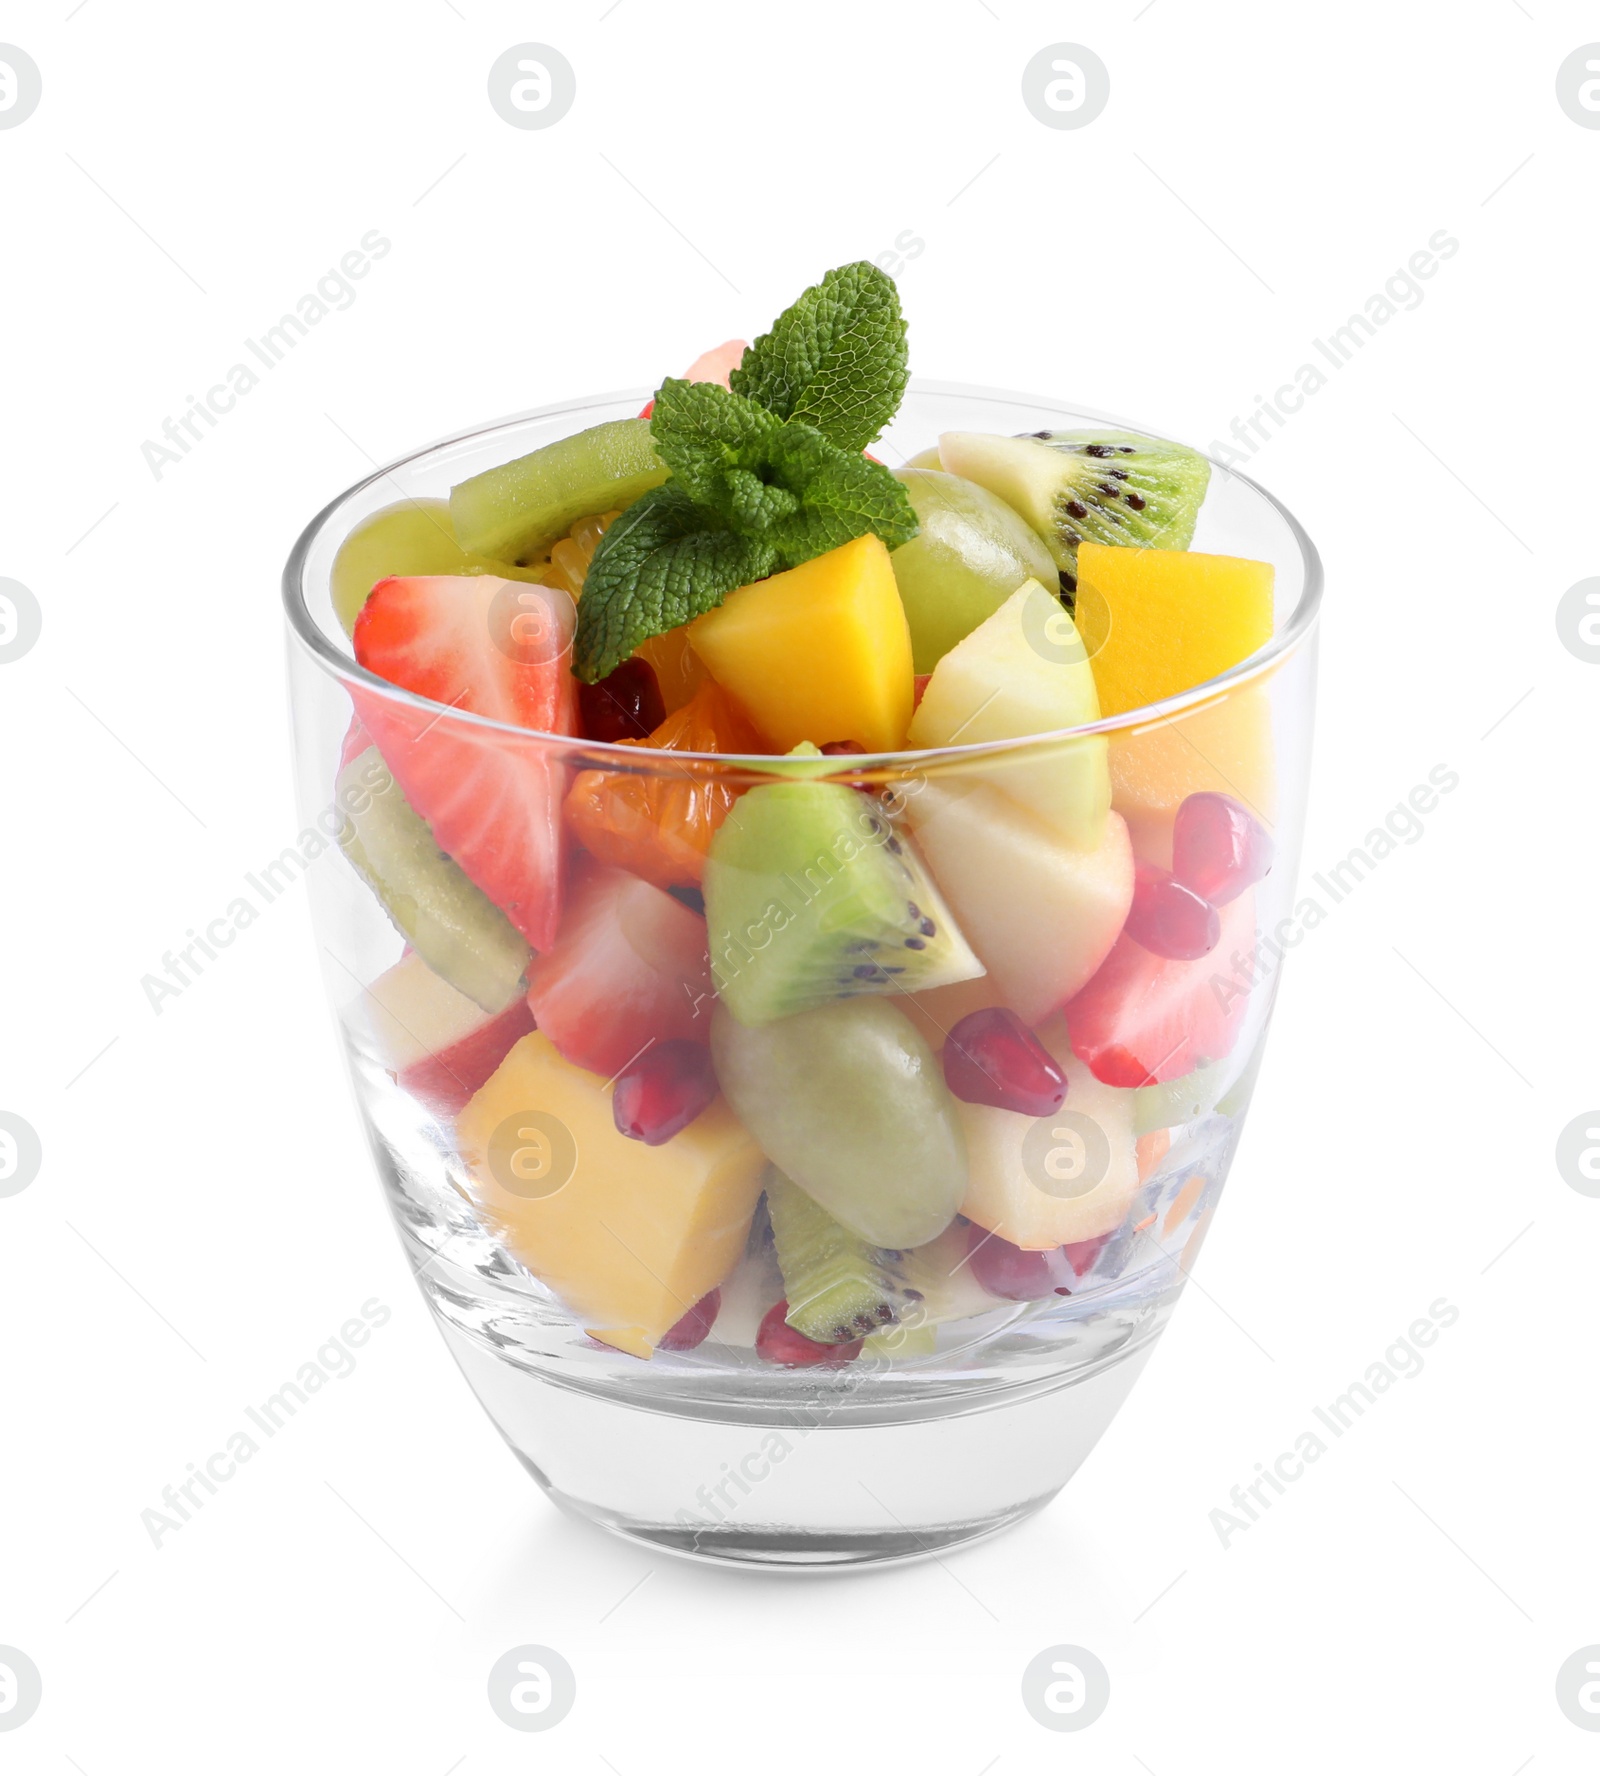 Photo of Delicious fresh fruit salad in dish on white background